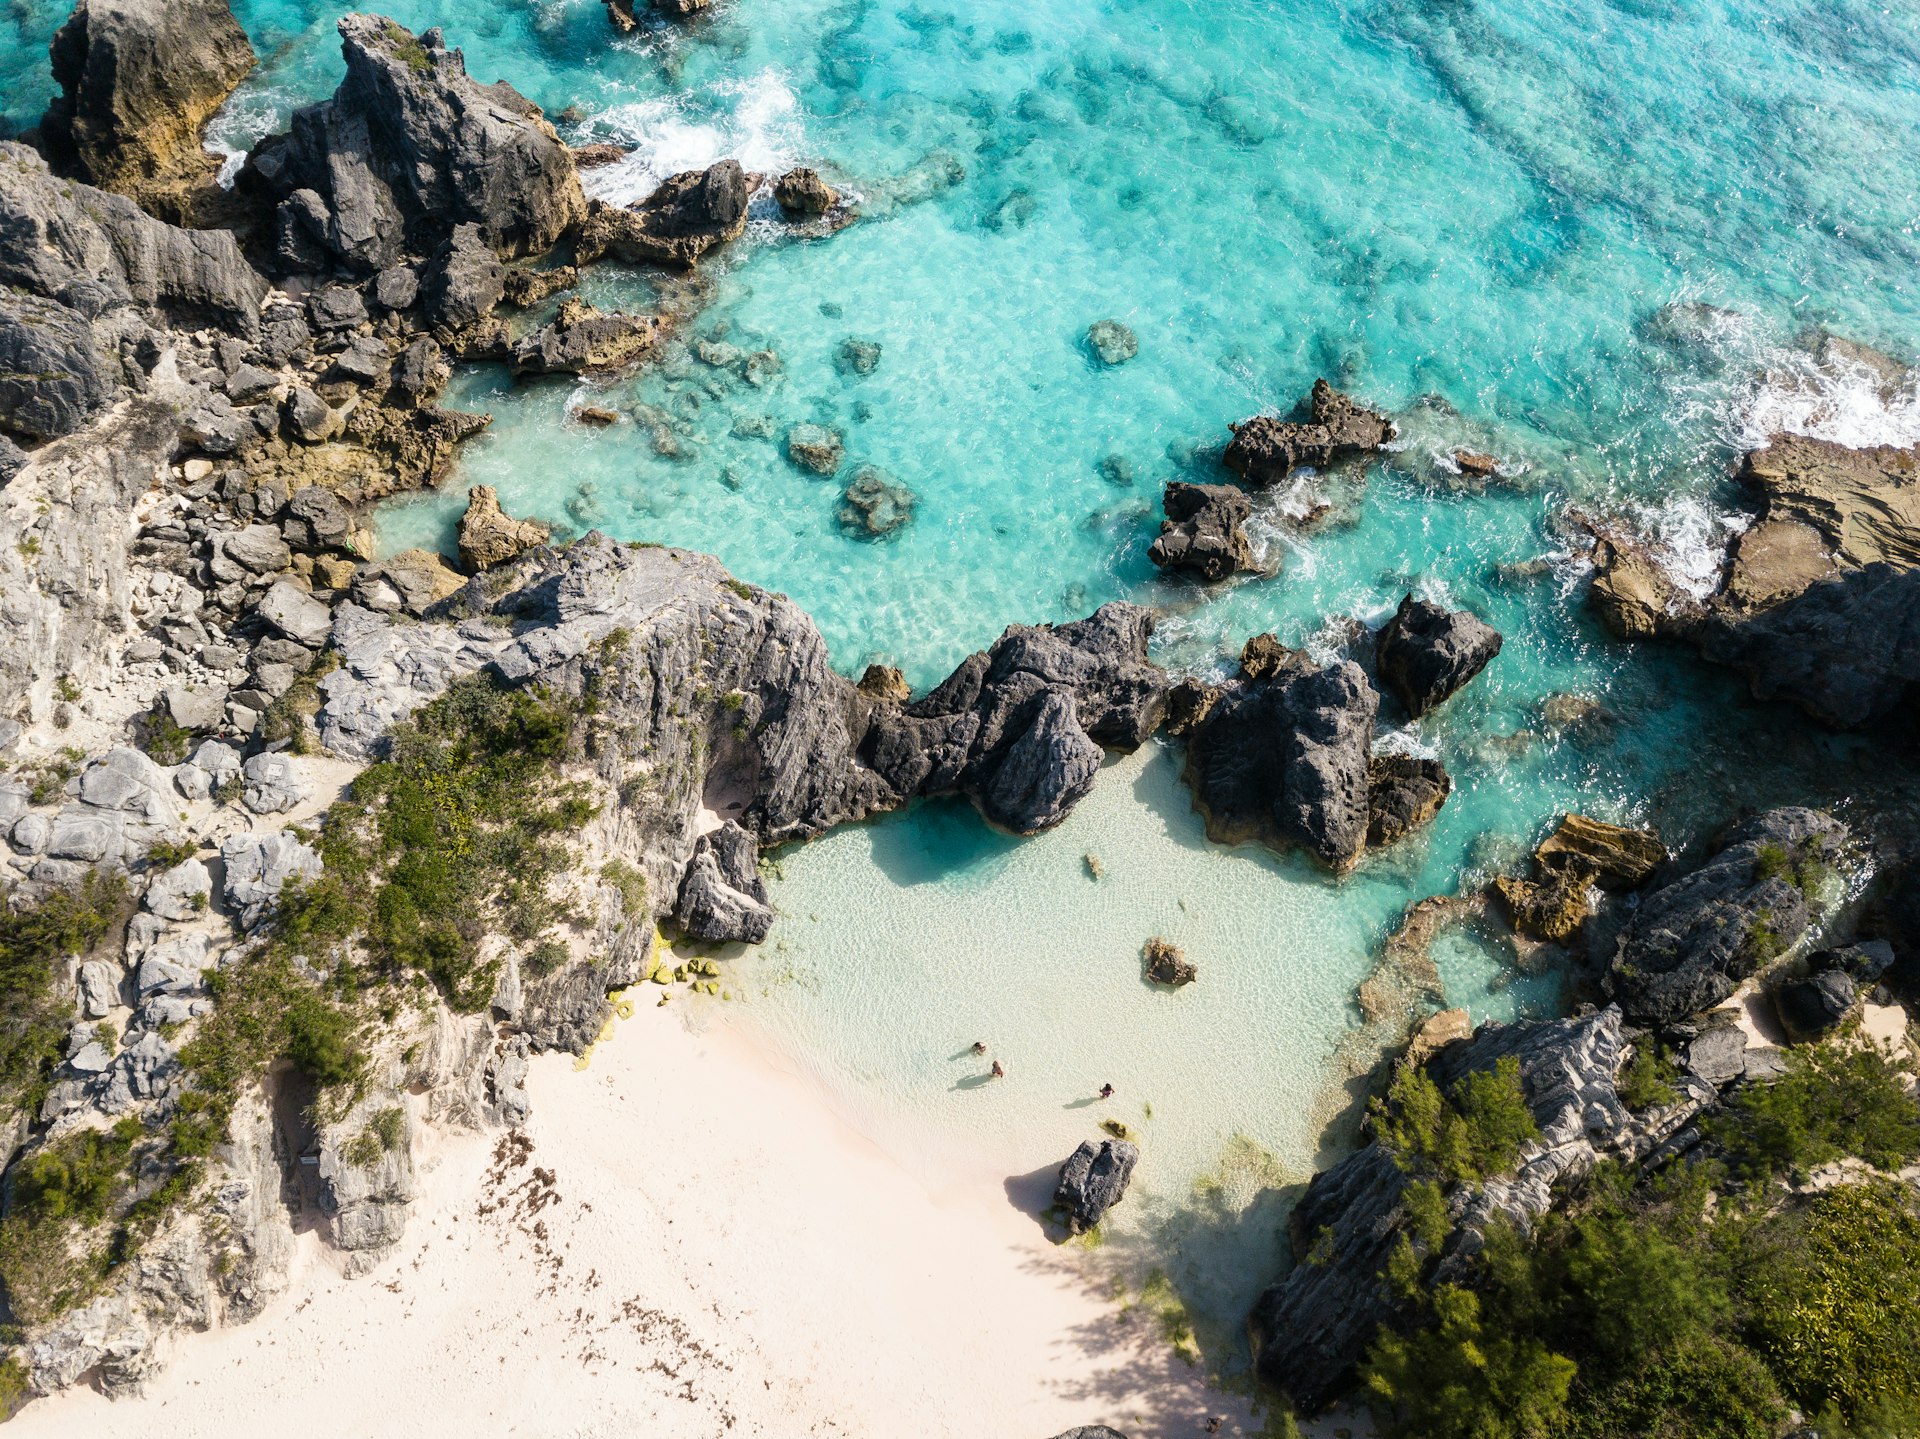 Aerial view of a rocky cove in Bermuda with two people standing on the shore